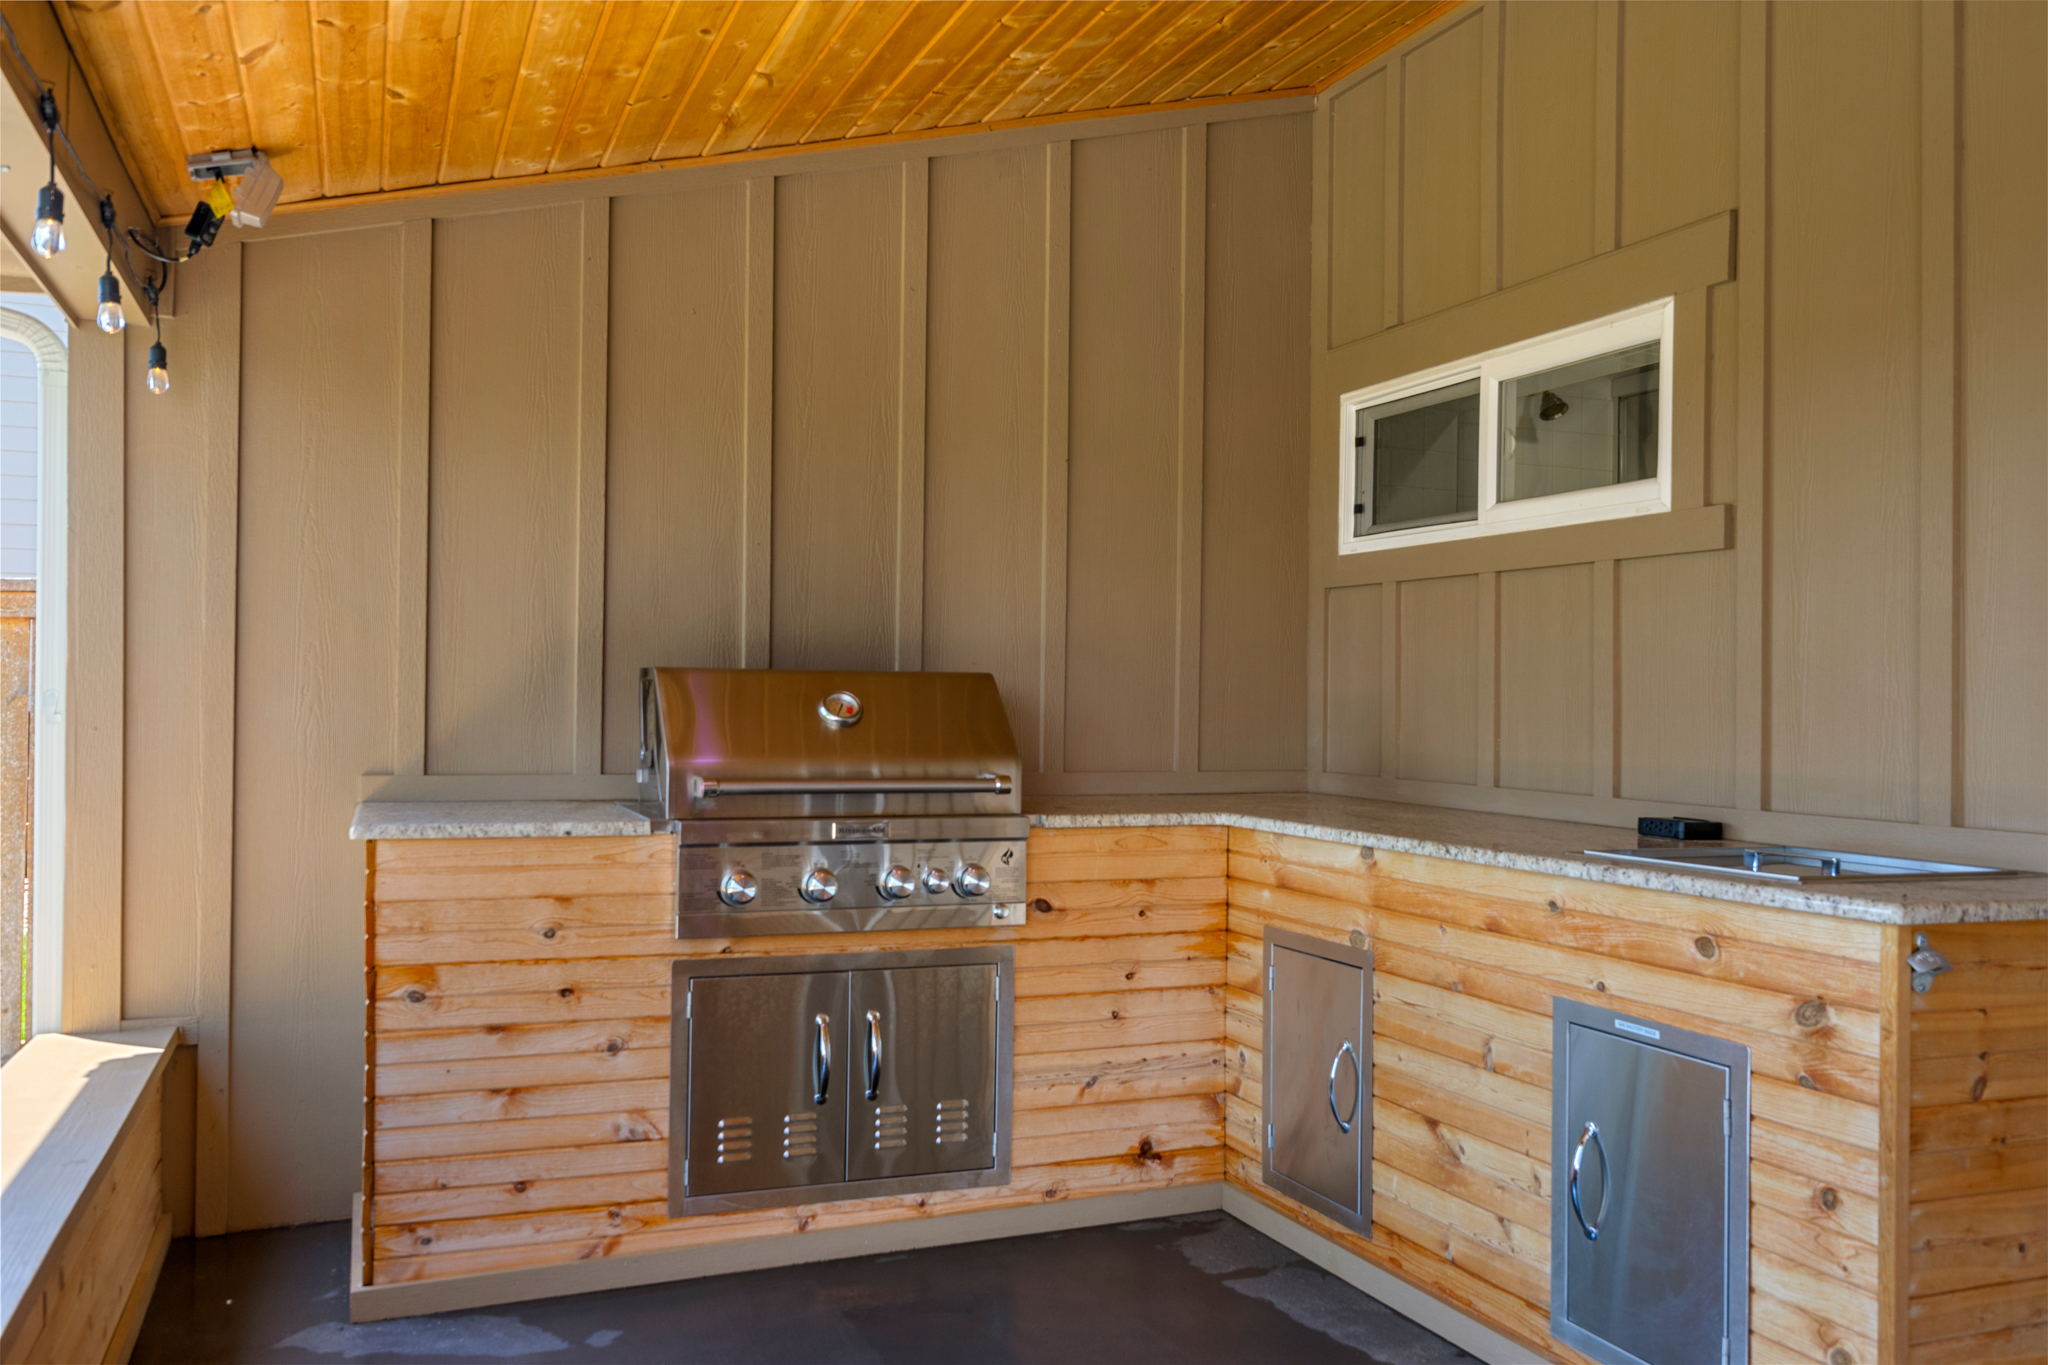 Covered Patio, Built-BBQ Station, Even a Bottle Opener Already in Place!